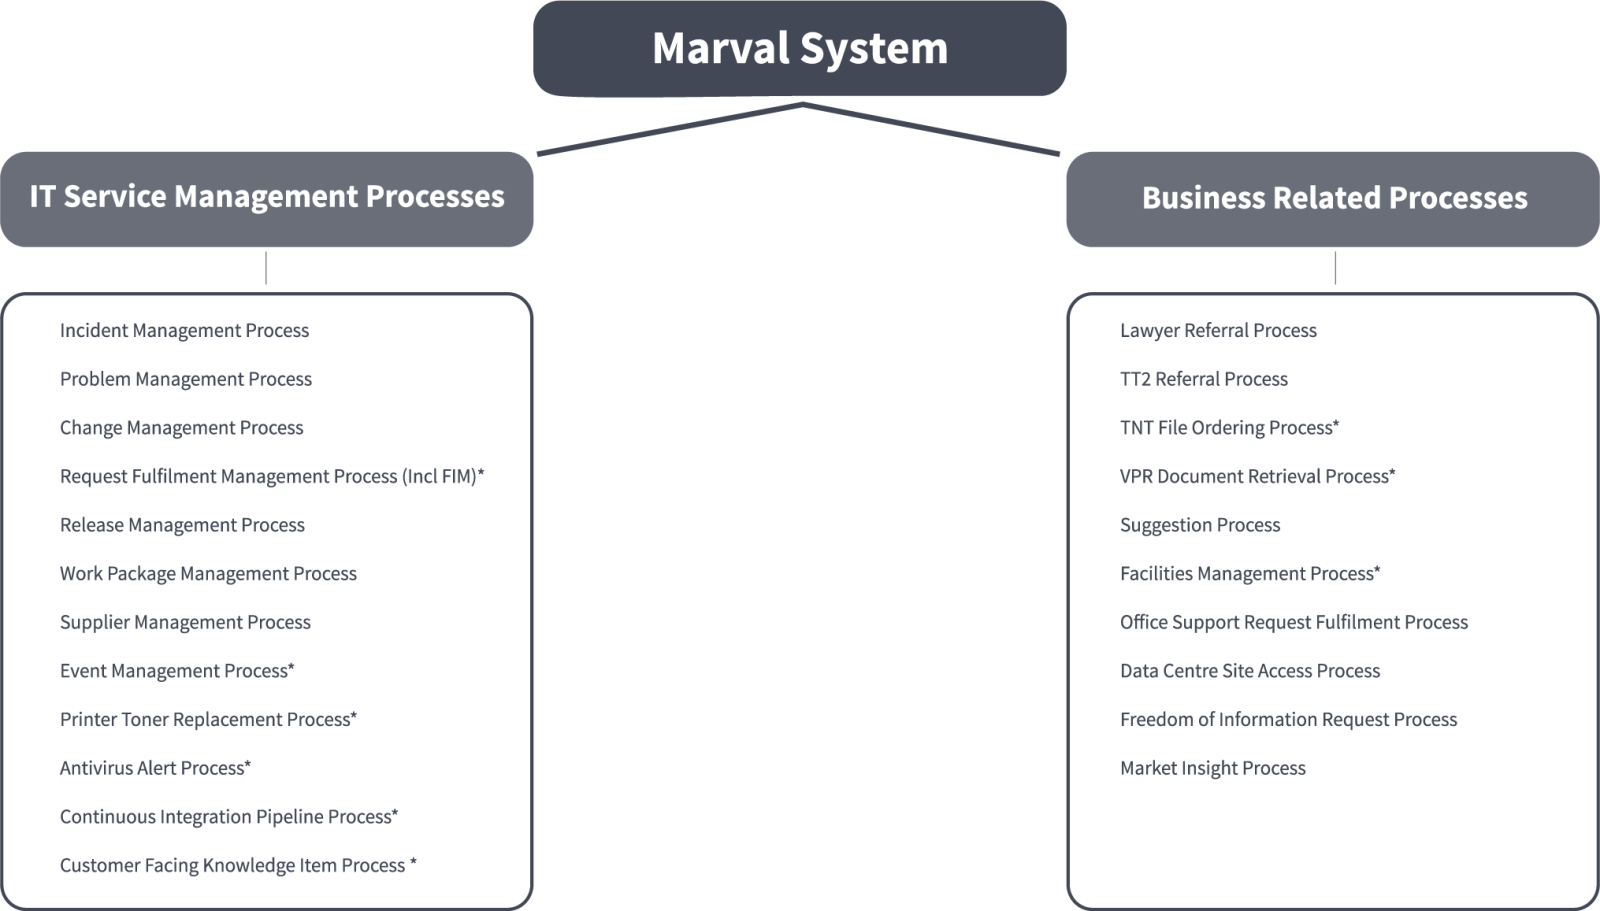 Process areas underpinned by Marval system at HMLR 